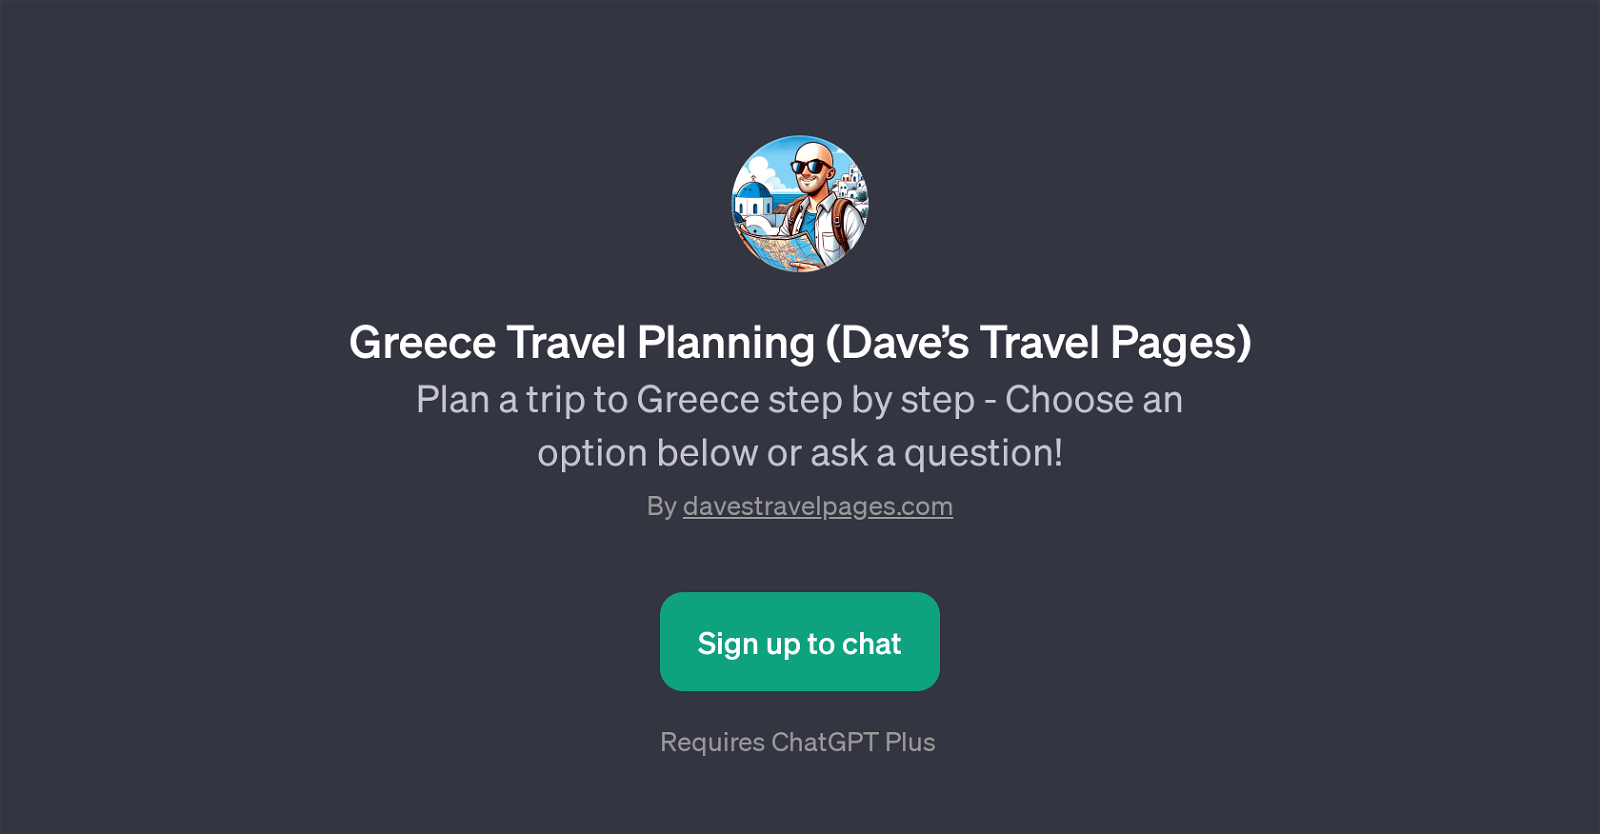 Greece Travel Planning (Daves Travel Pages) website